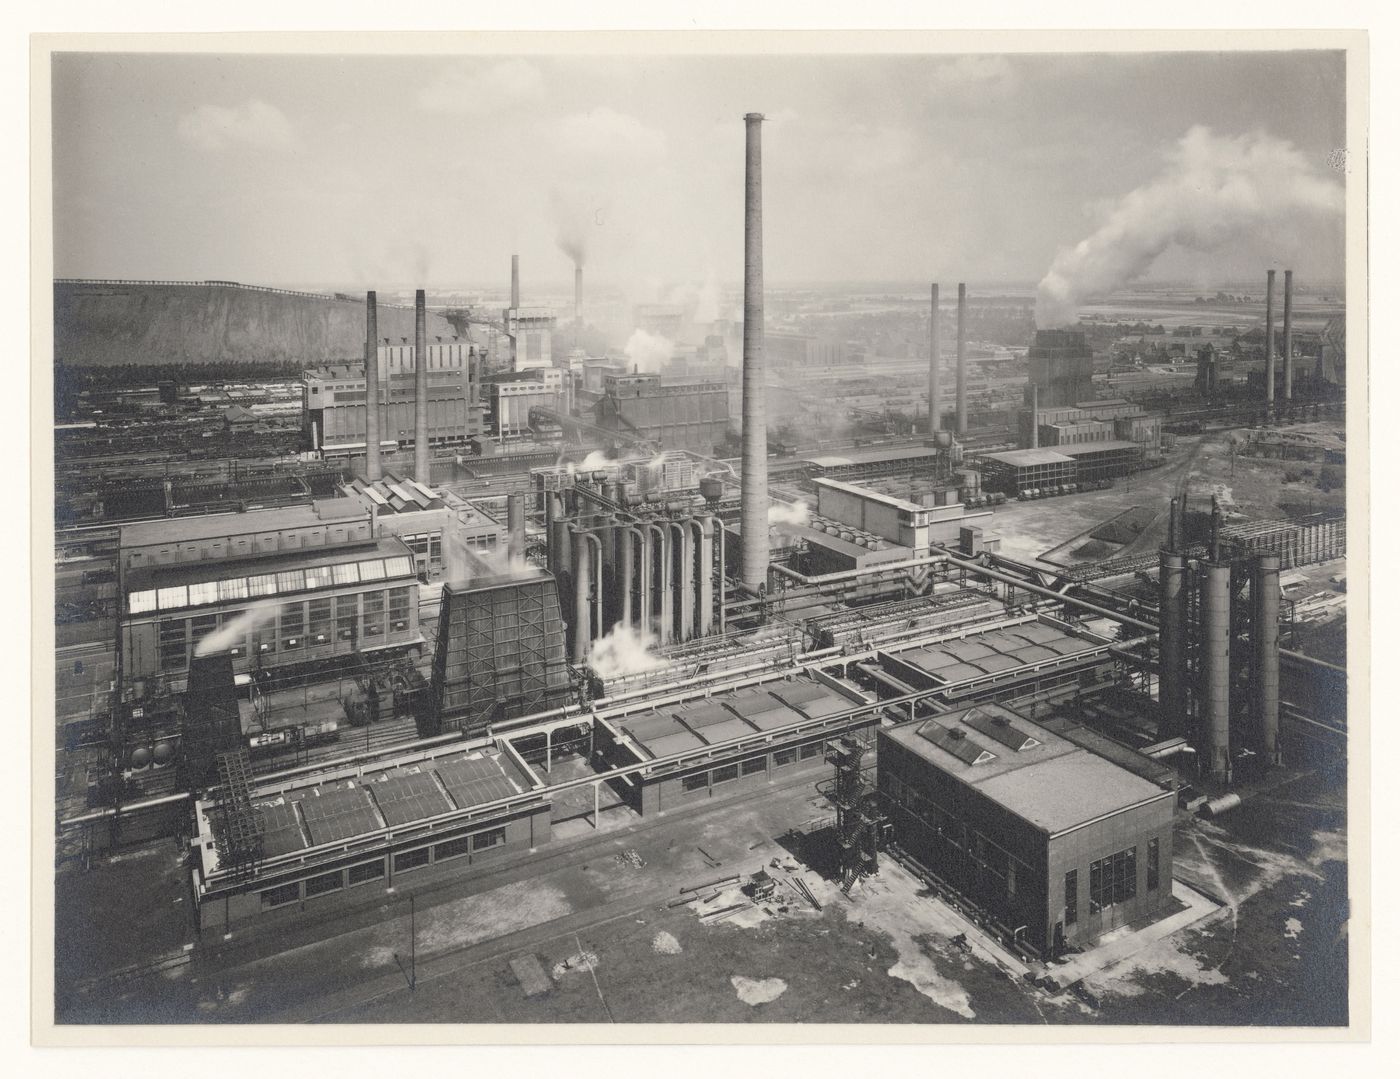 General view of large industrial site, from elevated view point, showing various chimneys, there is a tall one in the center of the composition